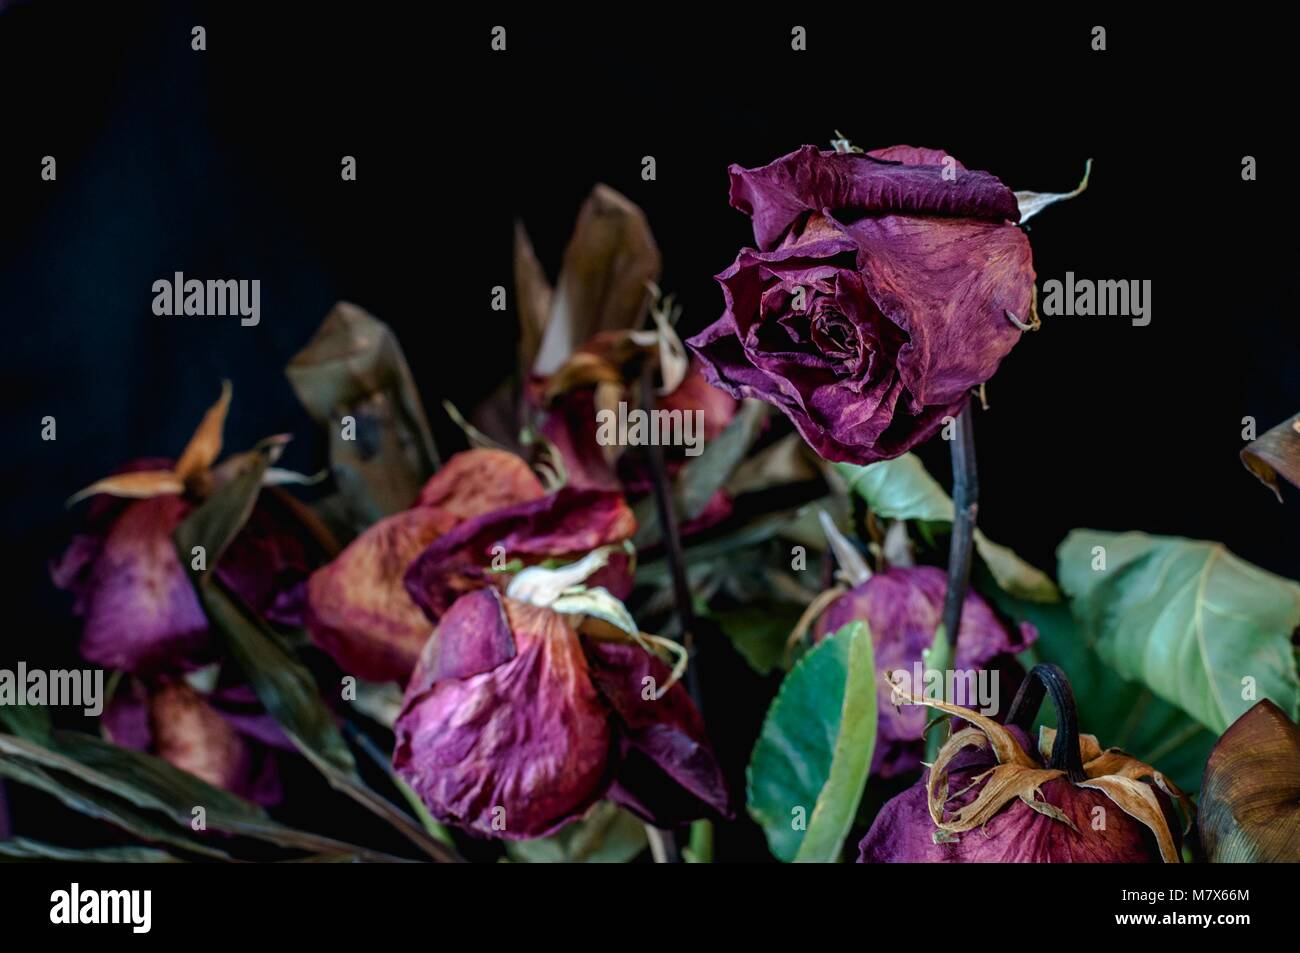 A closeup of a bunch of dried up, dead red roses against a black background Stock Photo